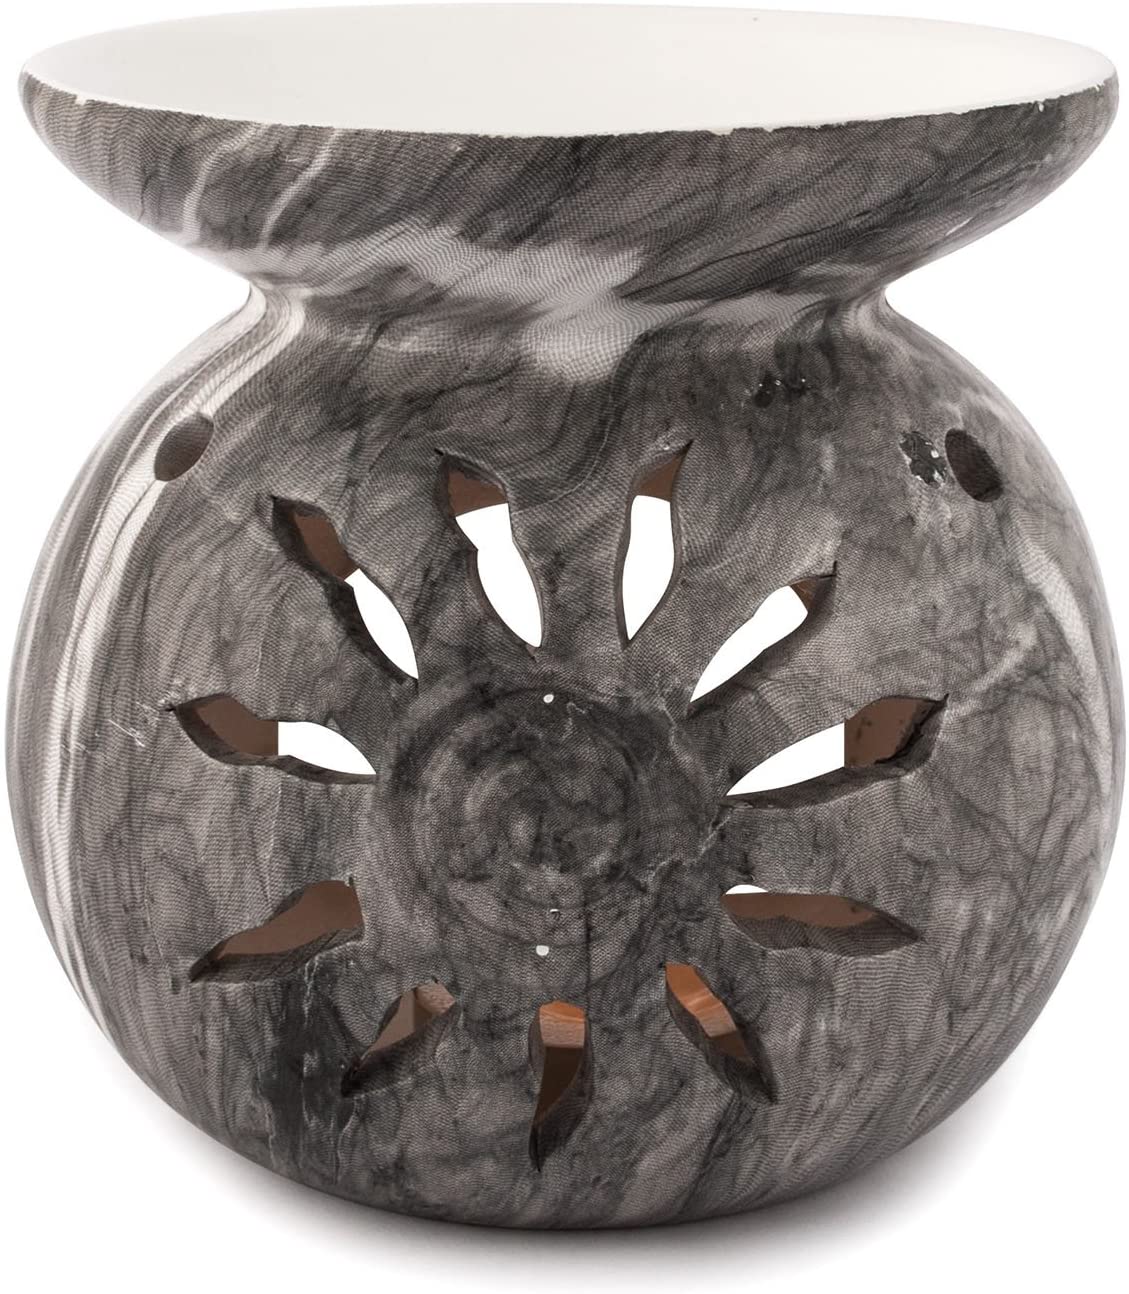 Ceramic Marble Pajoma 16843 Scented Oil Lamp, Height 11 Cm, Grey